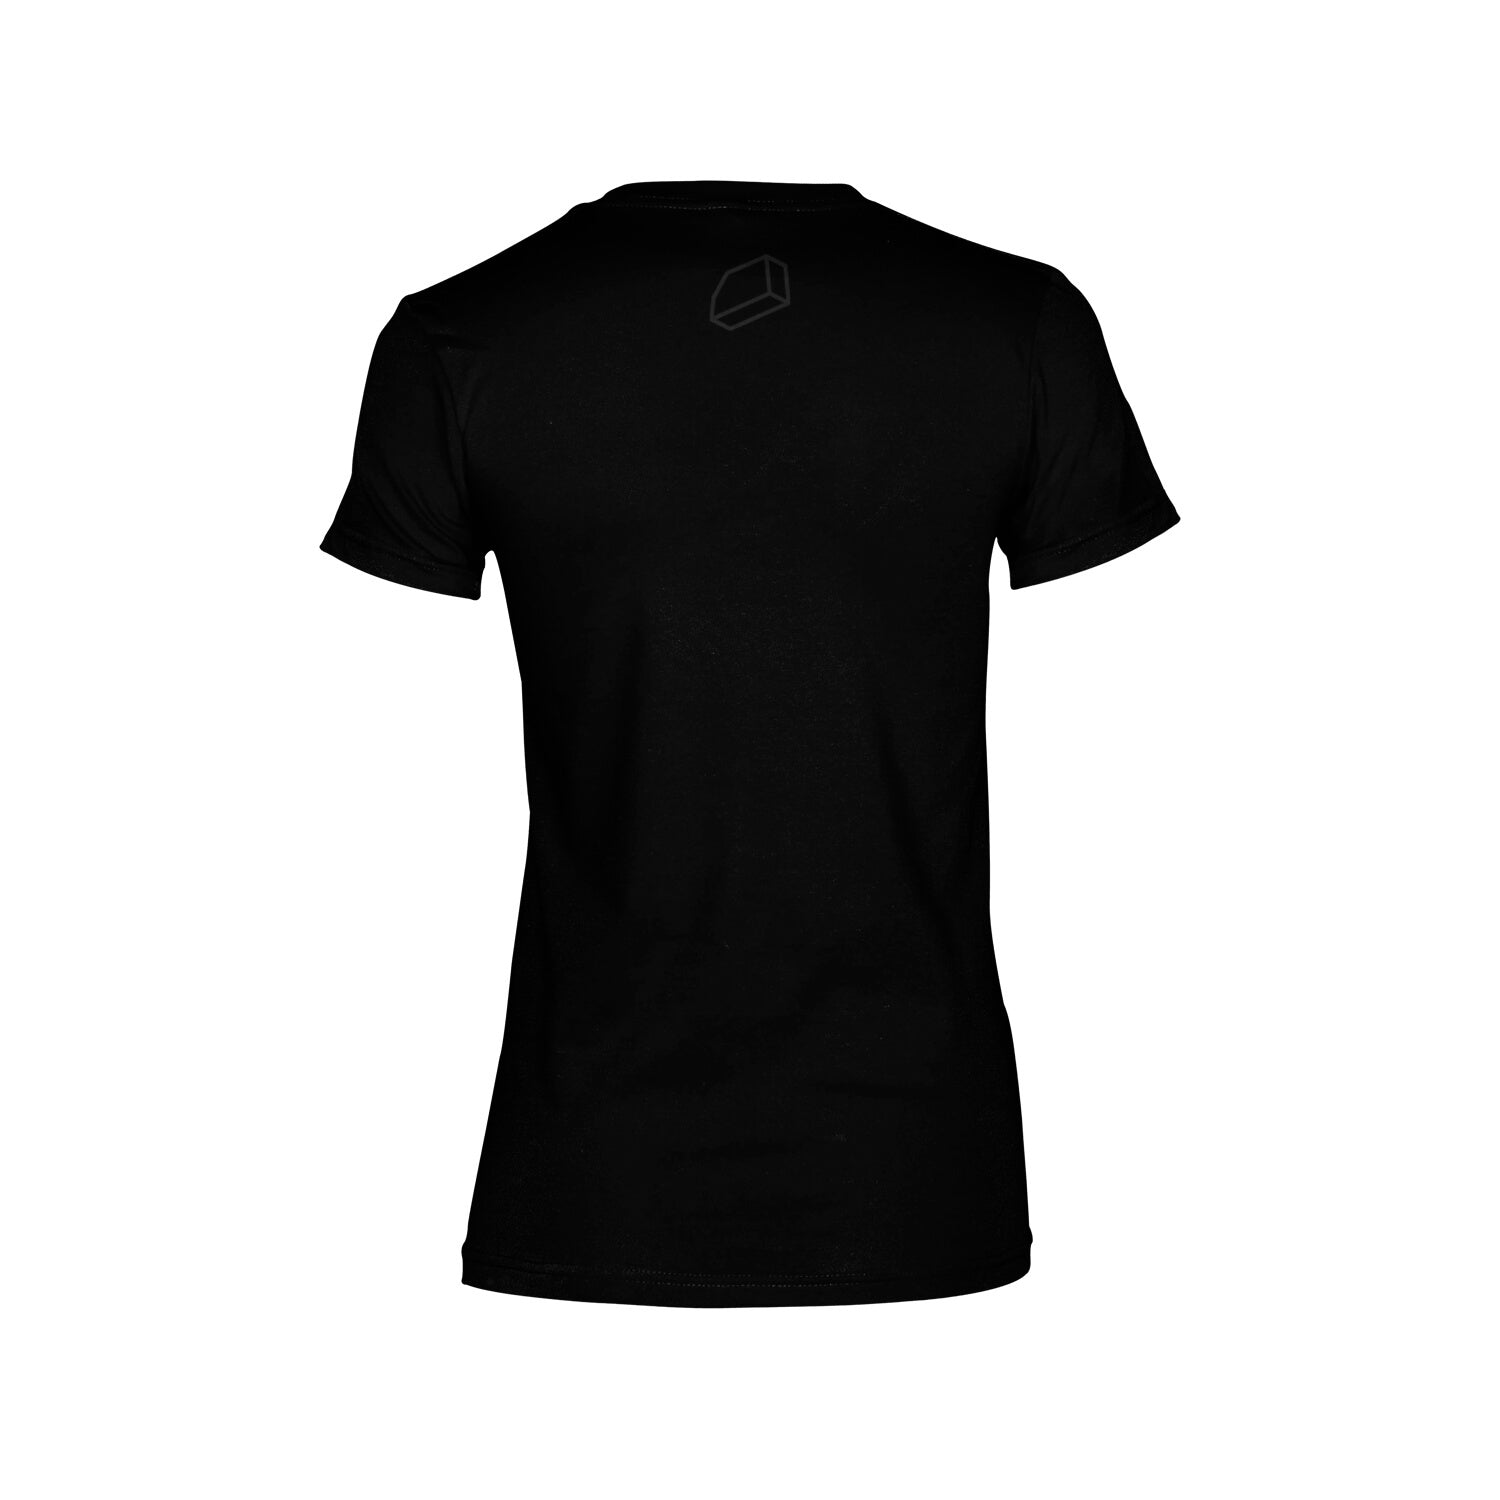 Limited Edition 25 Years Stealth T-shirt (Women's)